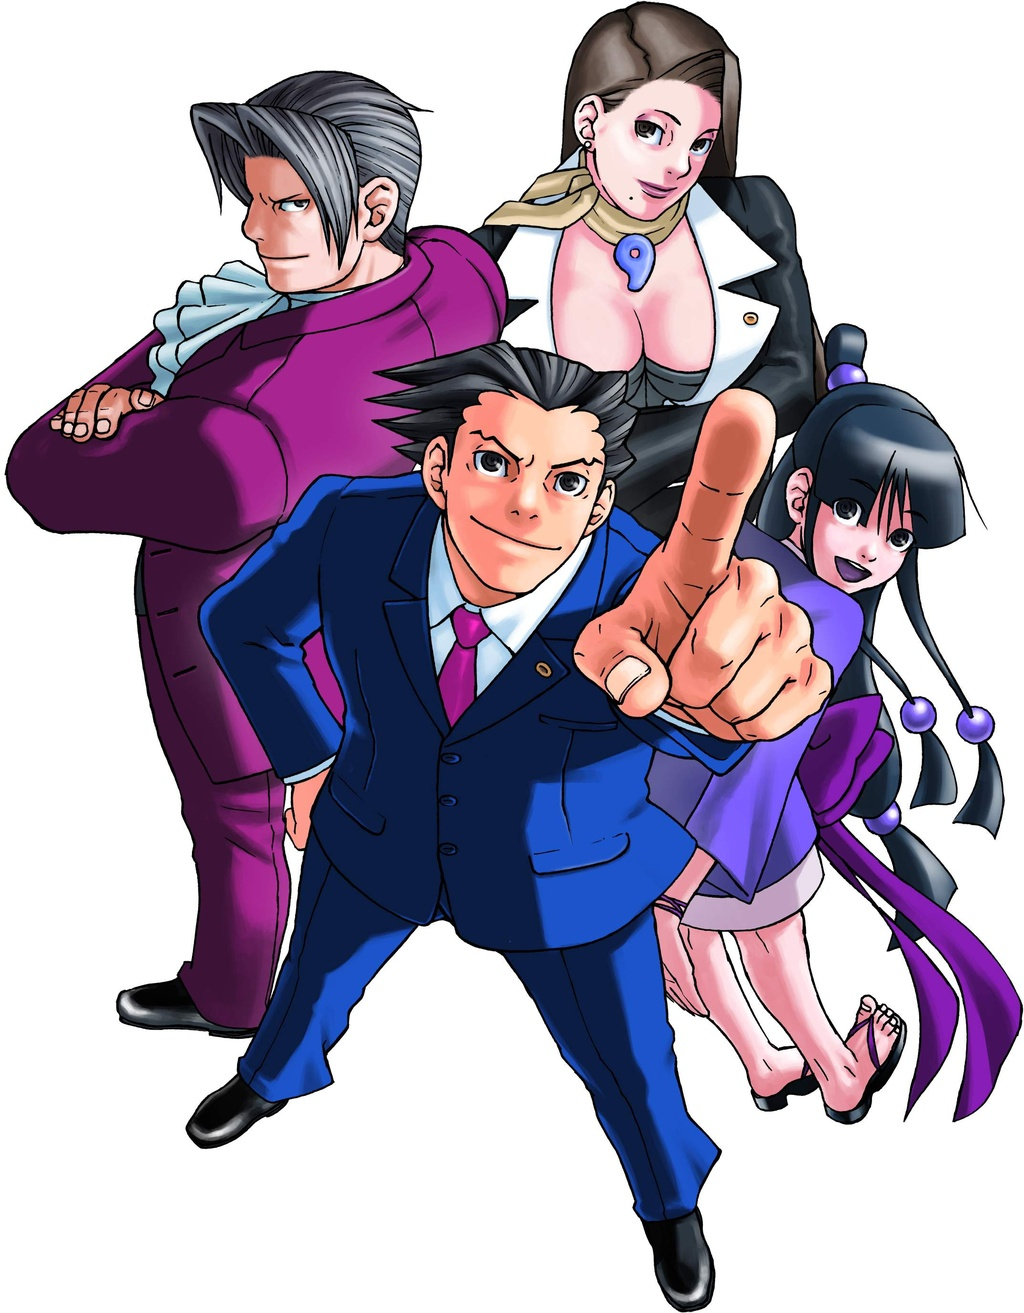 Ace Attorney 7: Release Date News, Confirmed Leaks, and Capcom